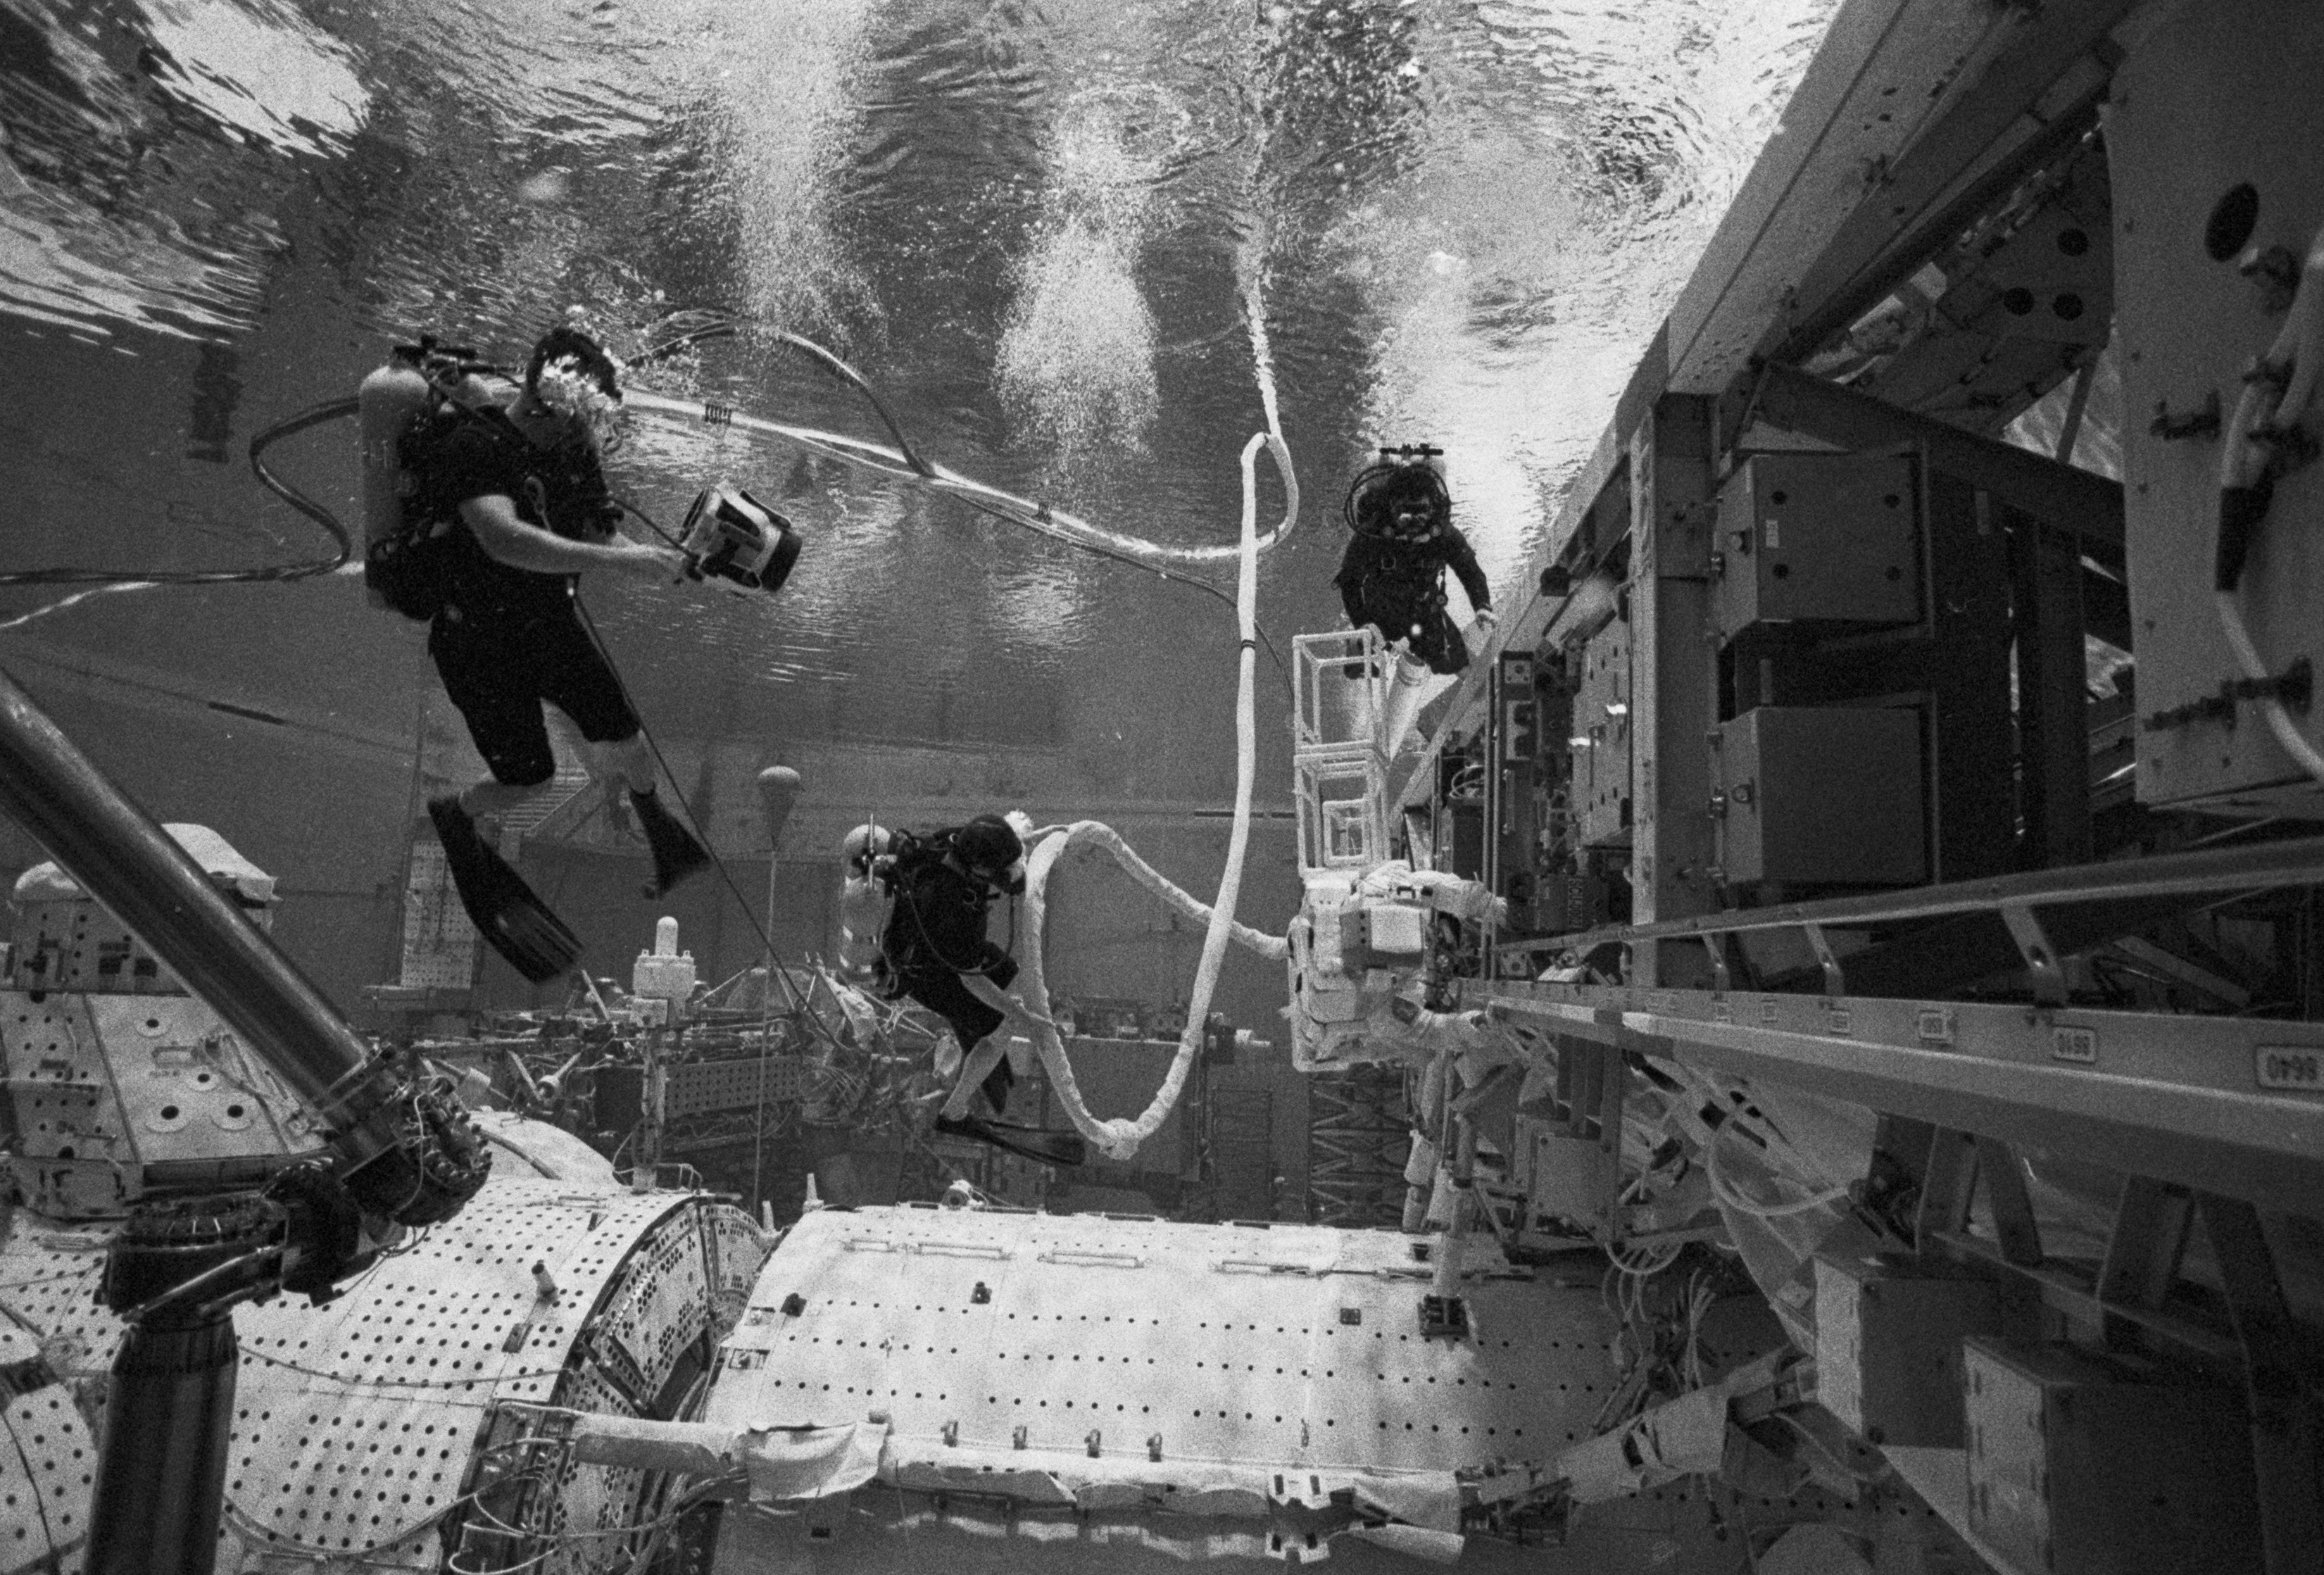 Making their way down the main truss segment of the ISS, a NASA crew member is assisted by divers to ensure a smooth transition in simulated flight-like conditions. Photo by Moe Lauchert.